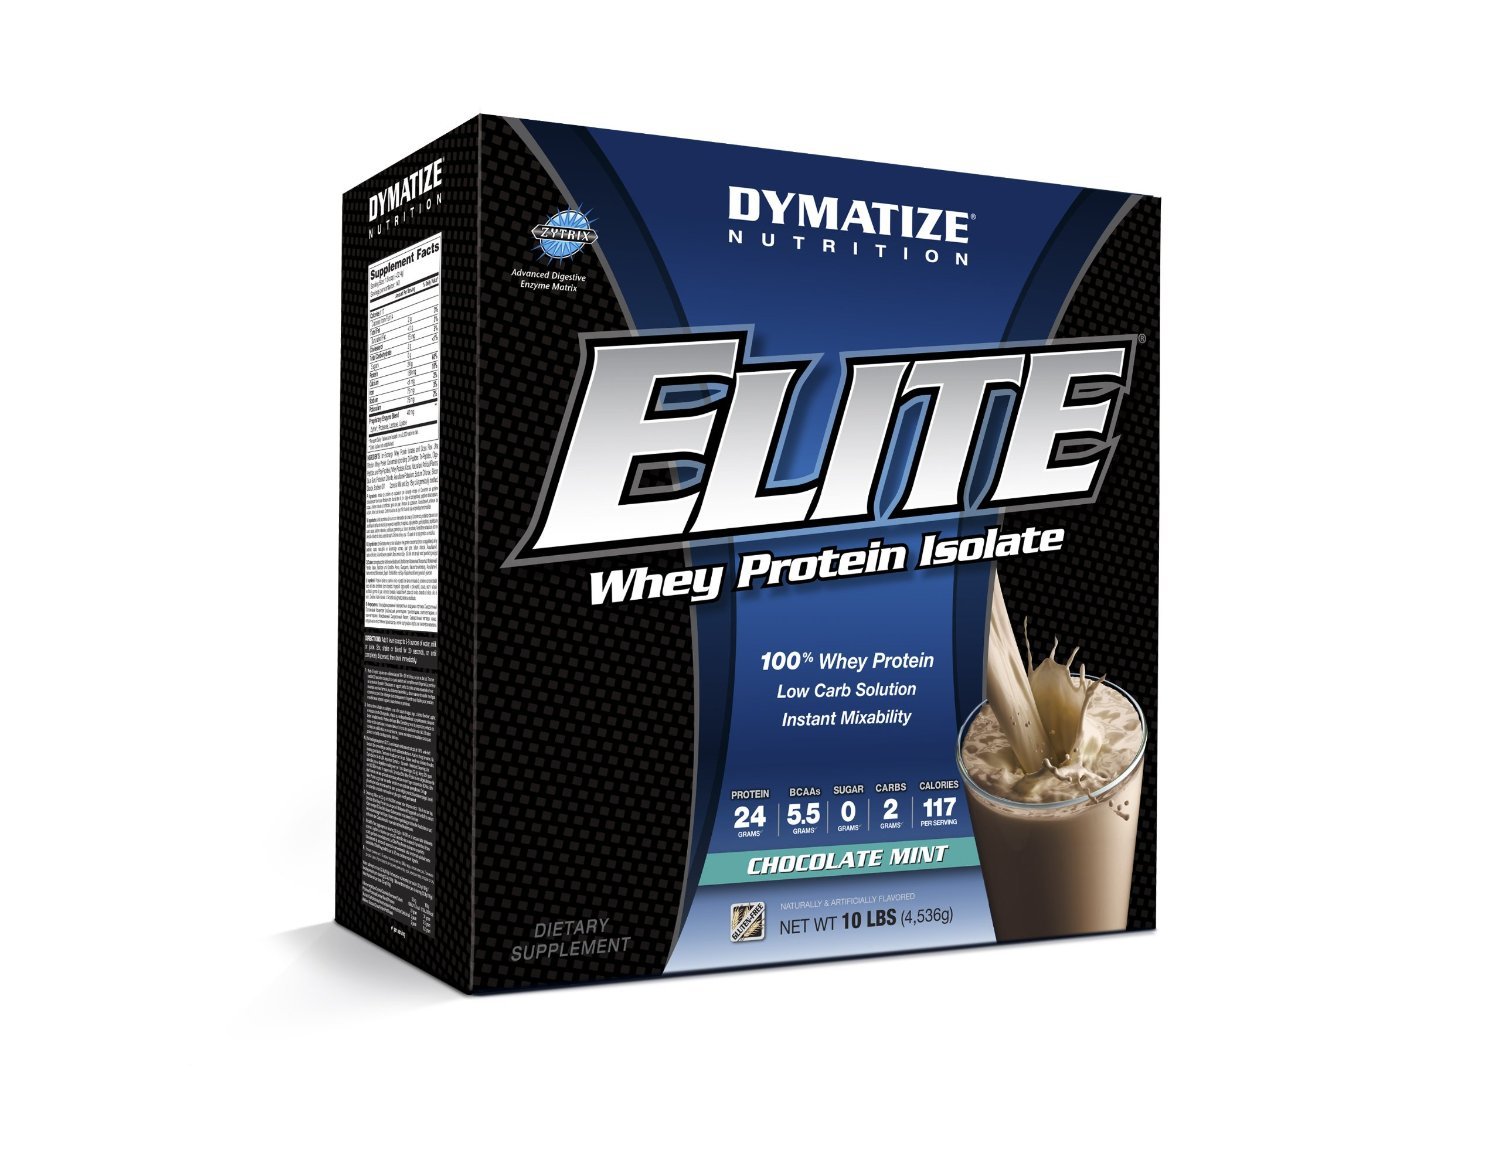 Elite Whey Protein Isolate, 4580 g, Dymatize Nutrition. Whey Isolate. Lean muscle mass Weight Loss स्वास्थ्य लाभ Anti-catabolic properties 